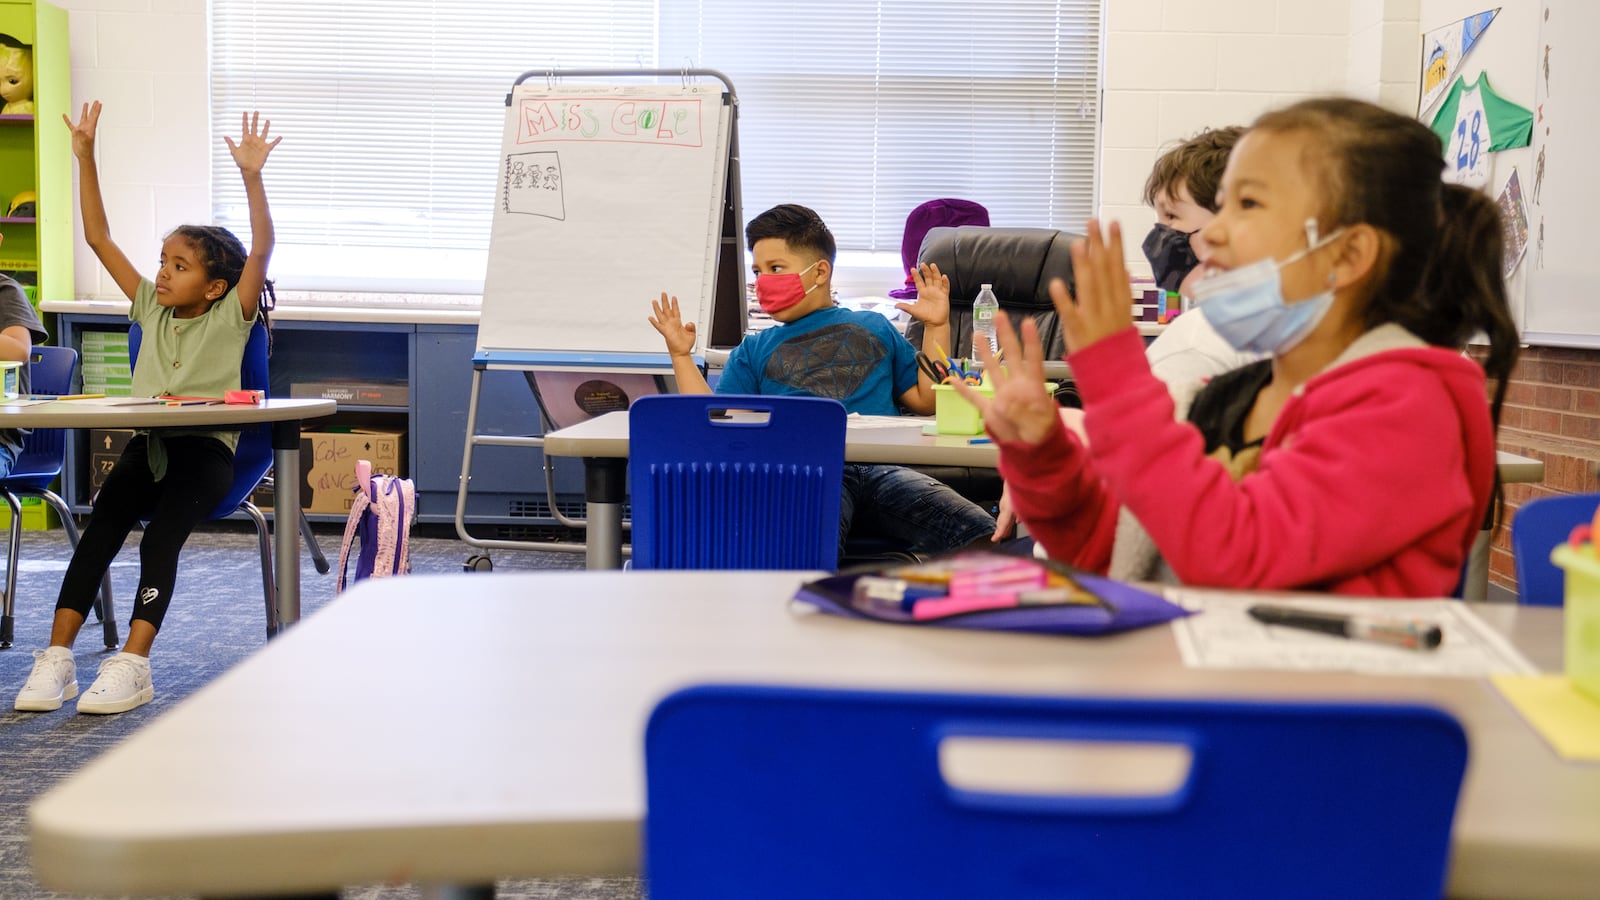 Elementary students excitedly raise their hands together at their desks. Some students are wearing protective masks, while others are not.